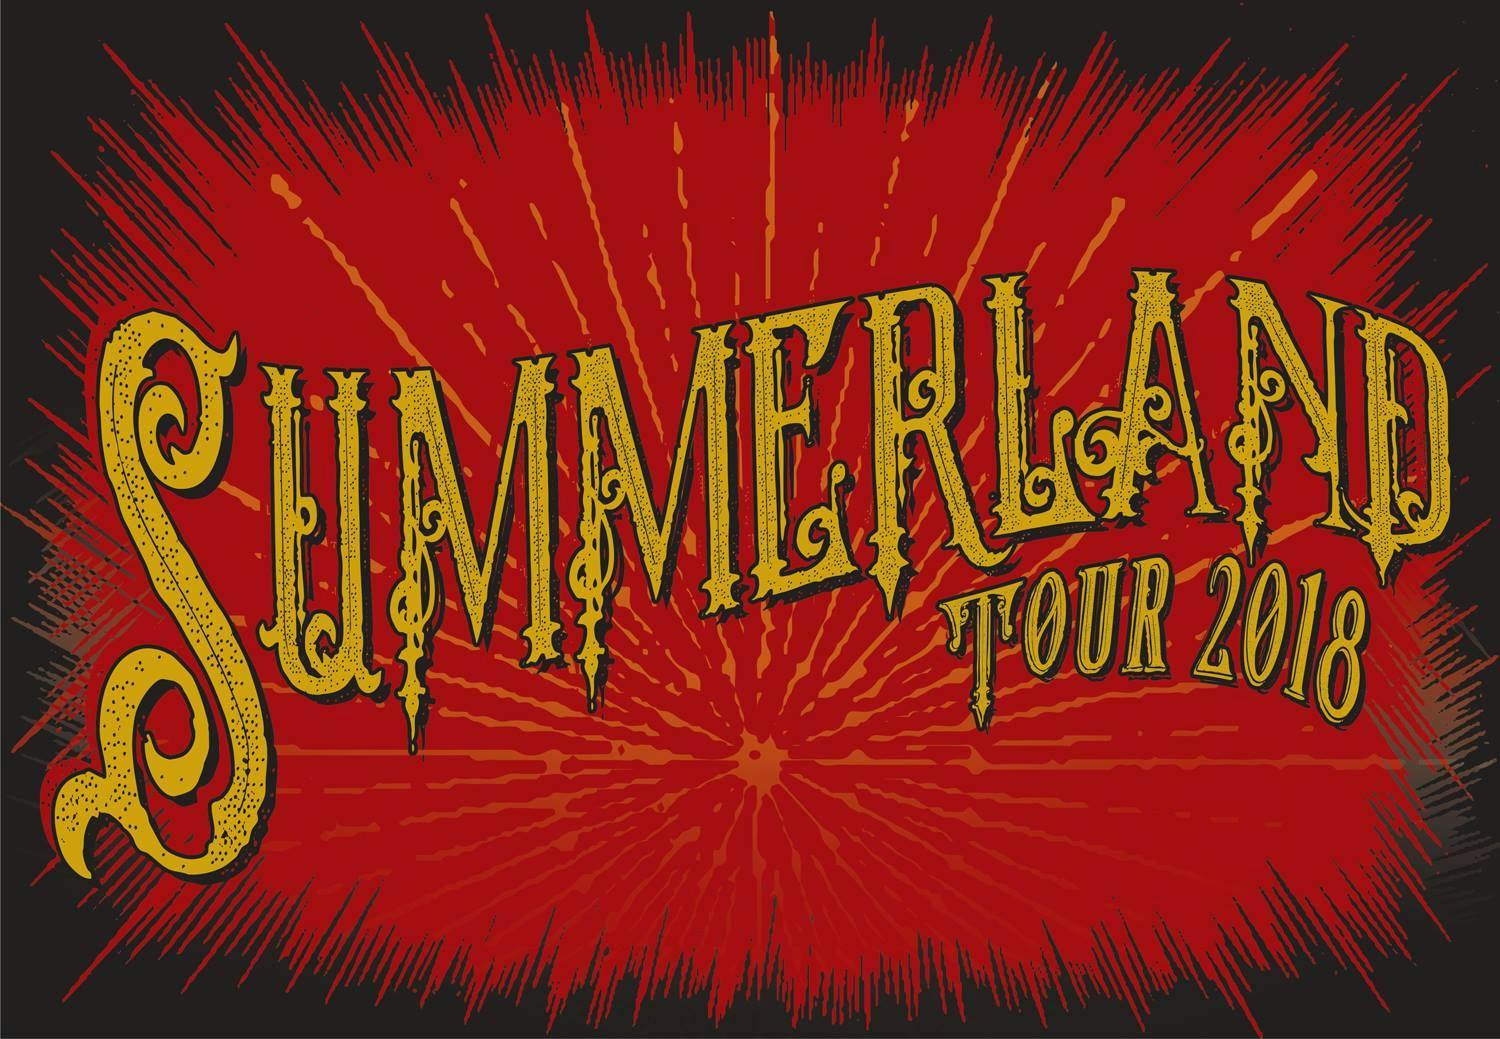 Summerland Tour '18 at Brenton Skating Plaza ft Everclear, Marcy Playground